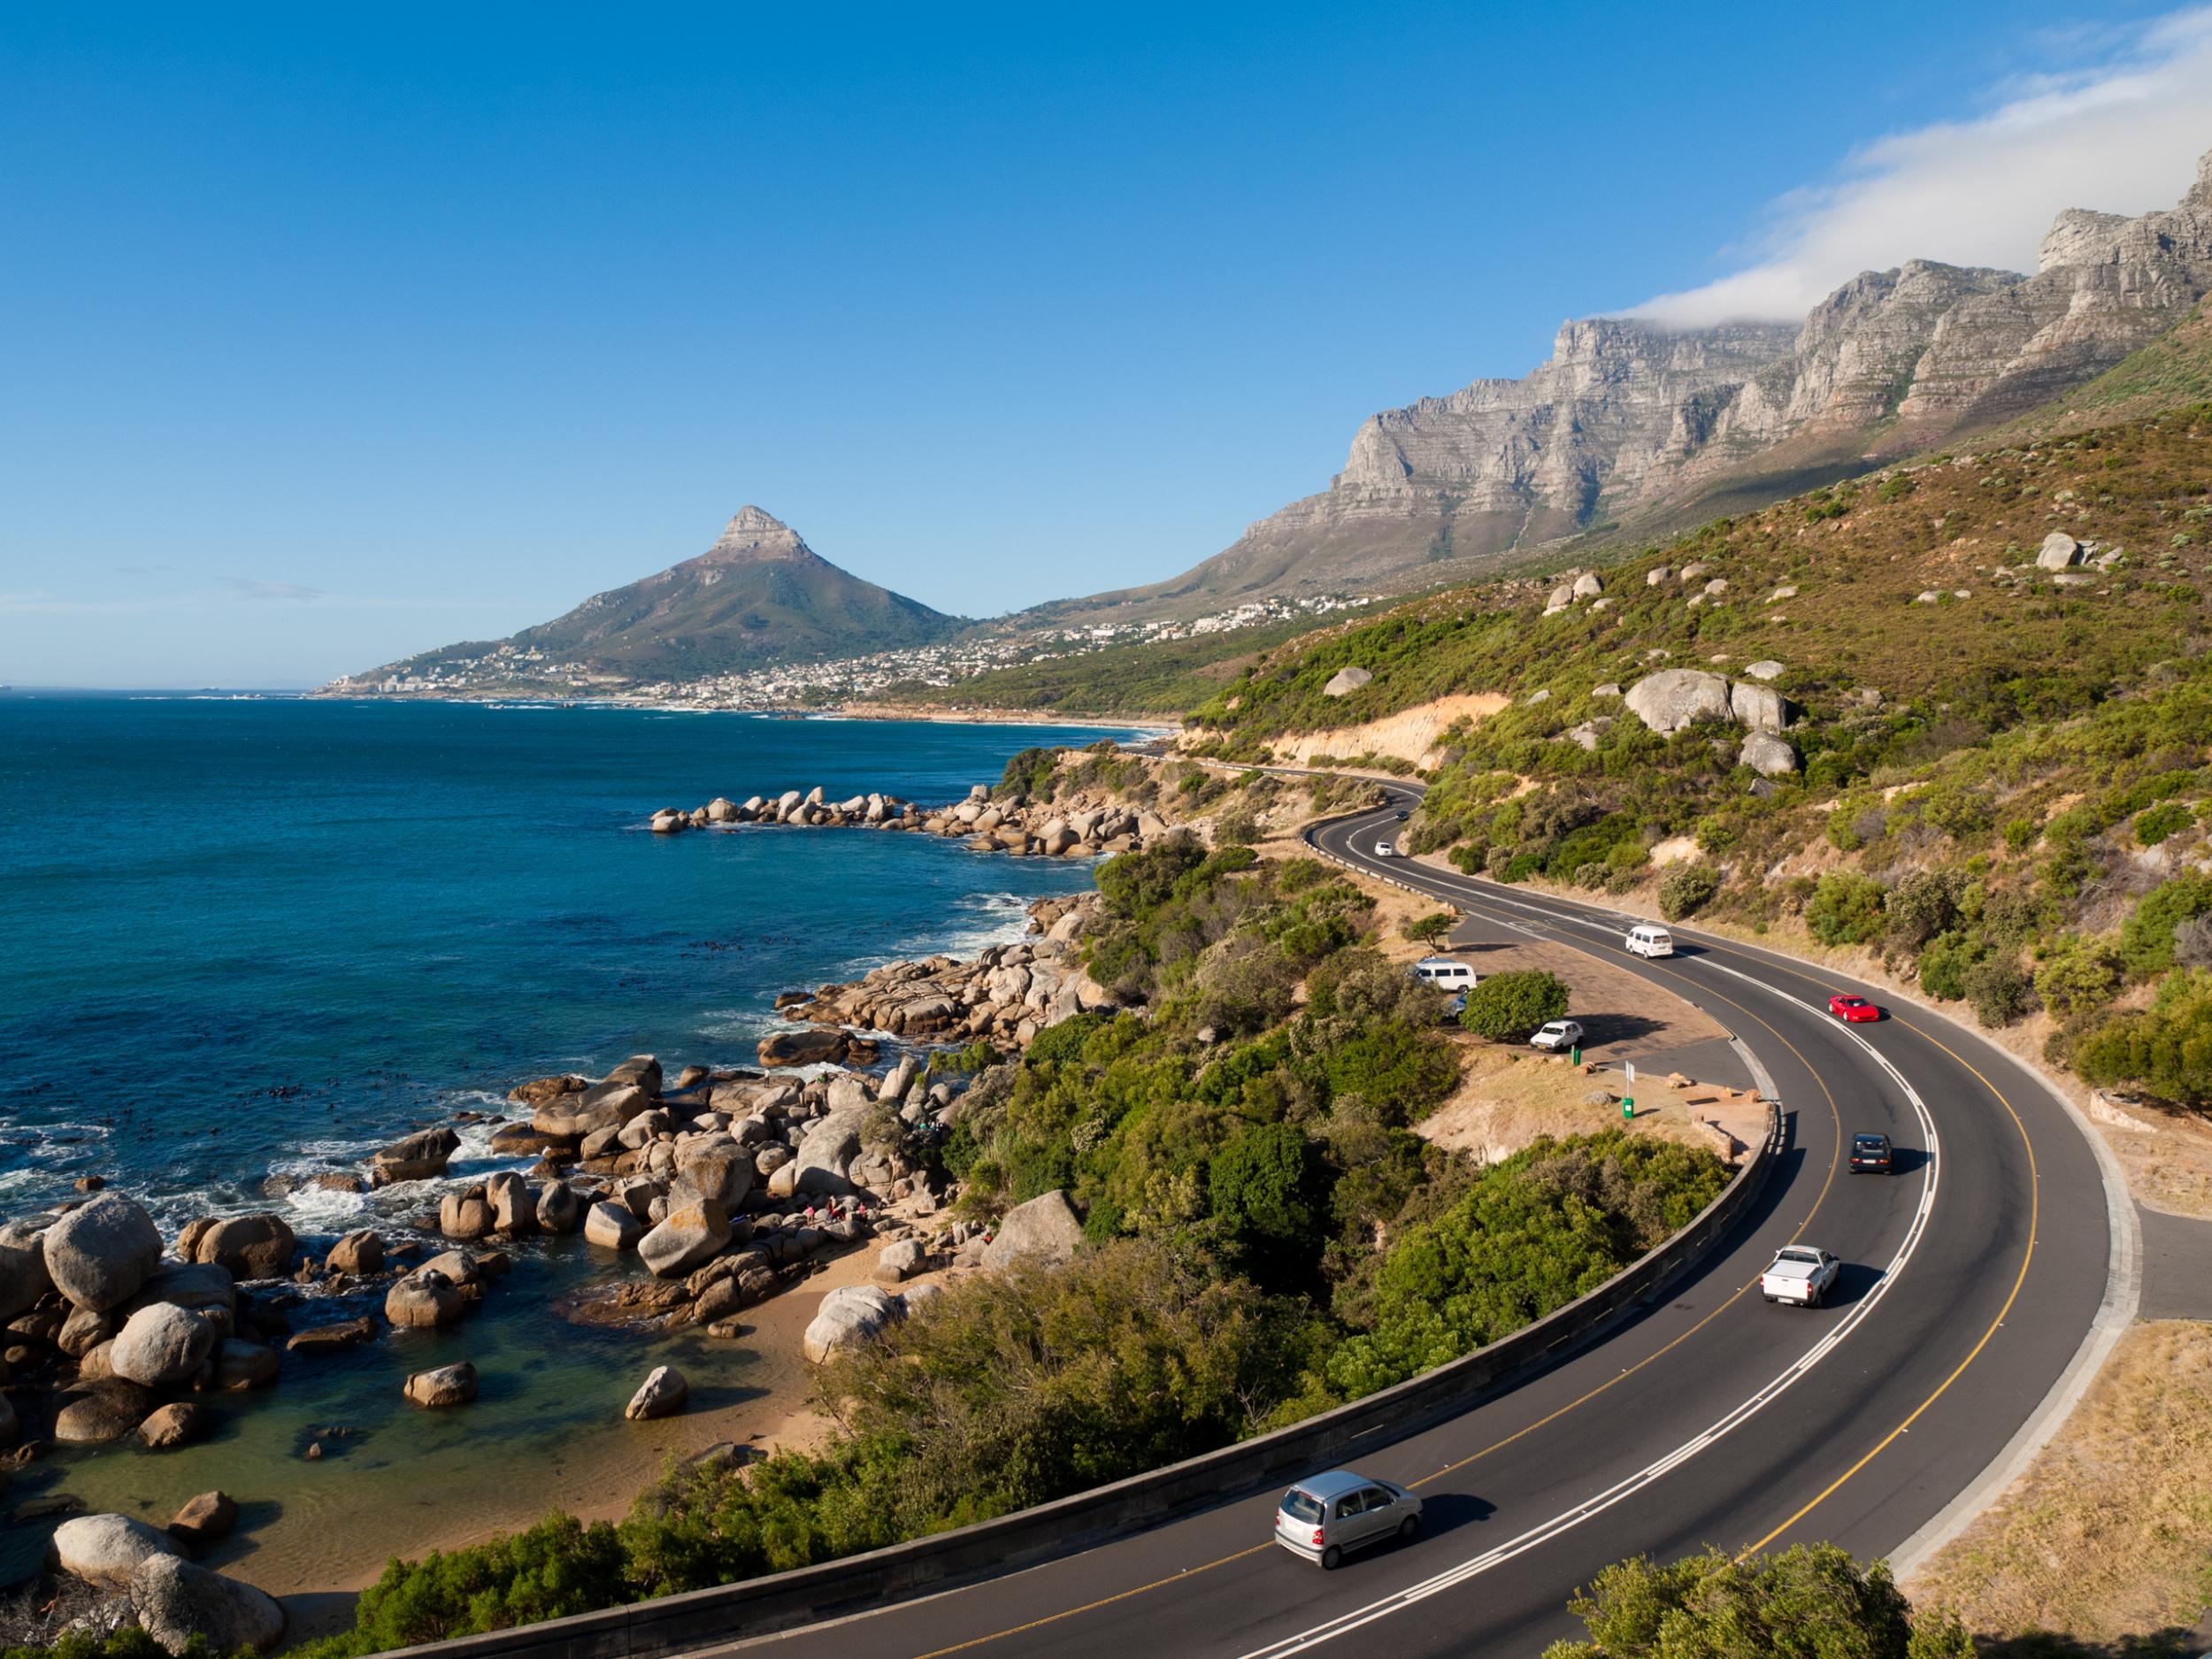 Spend your gap year driving the Garden Route in South Africa